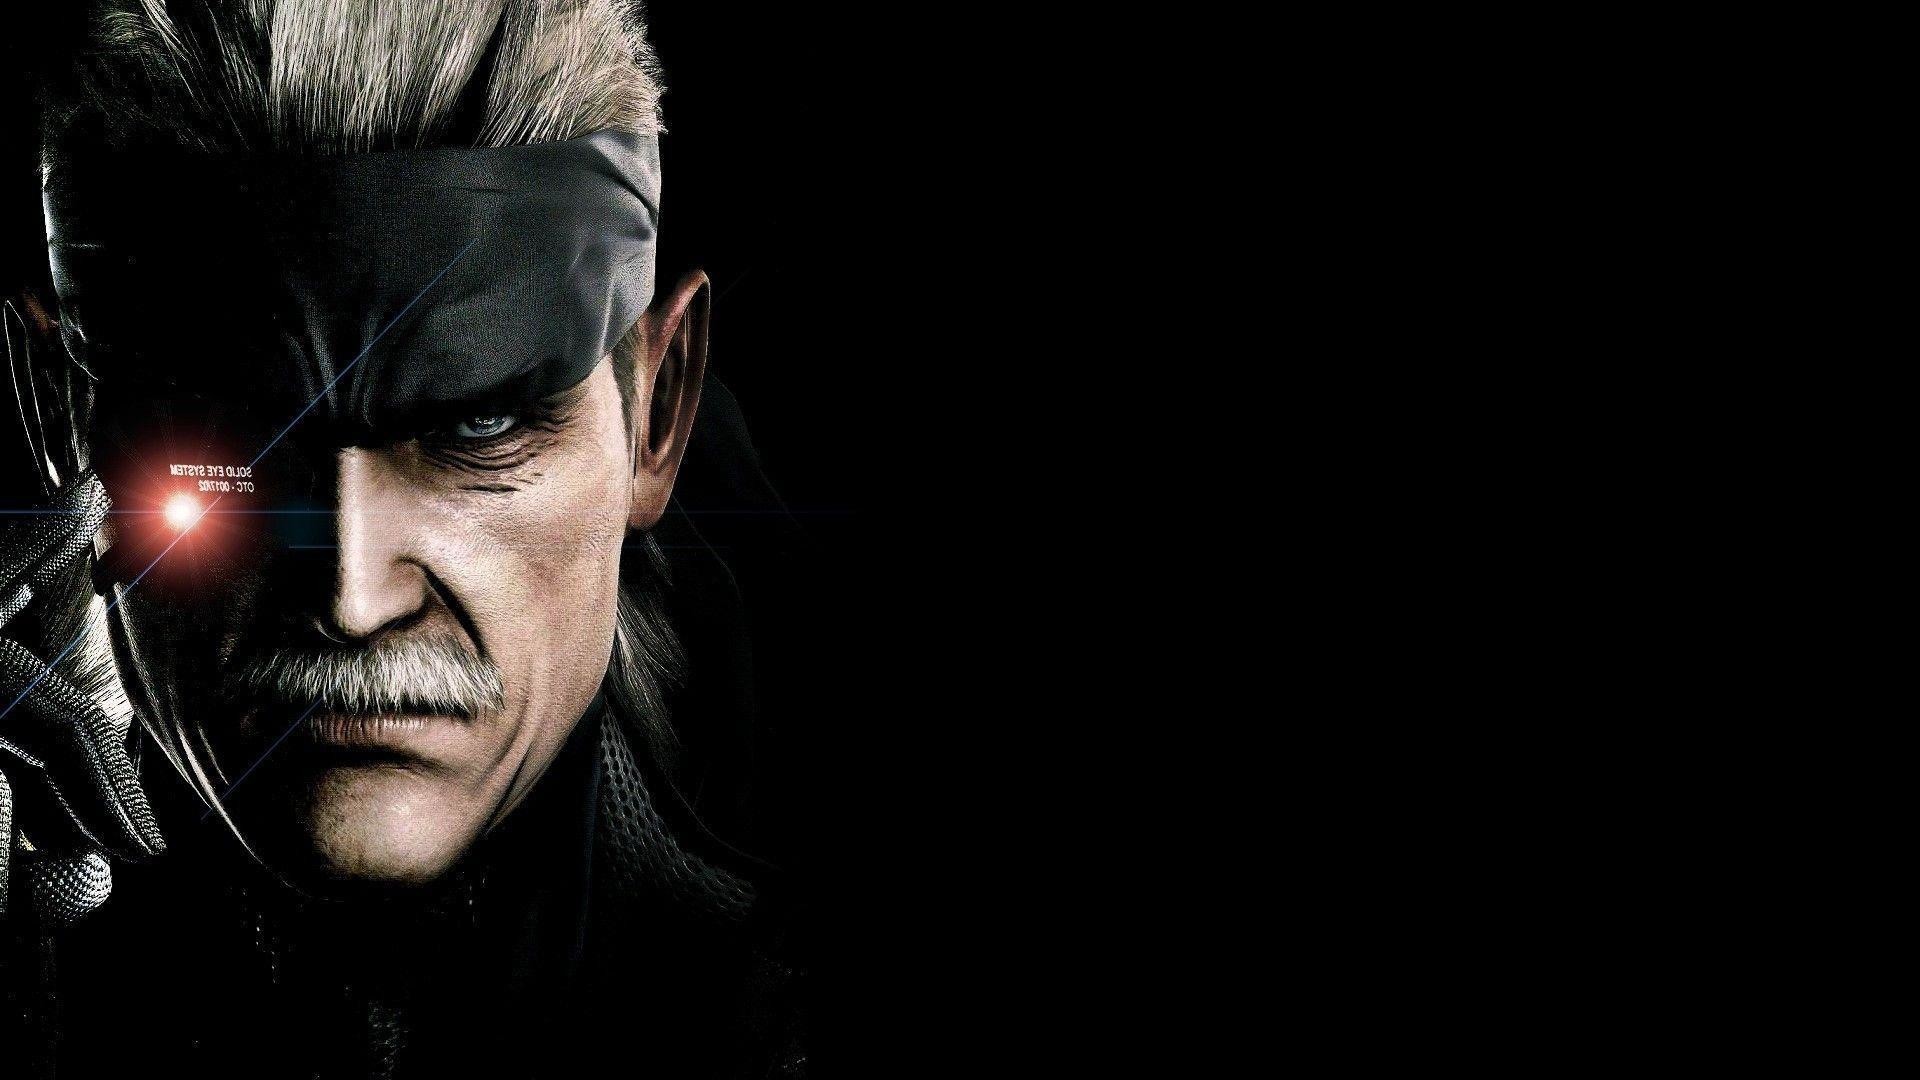 1920x1080 Metal Gear Solid V Video Game Wallpaper (6565) - Download Game .